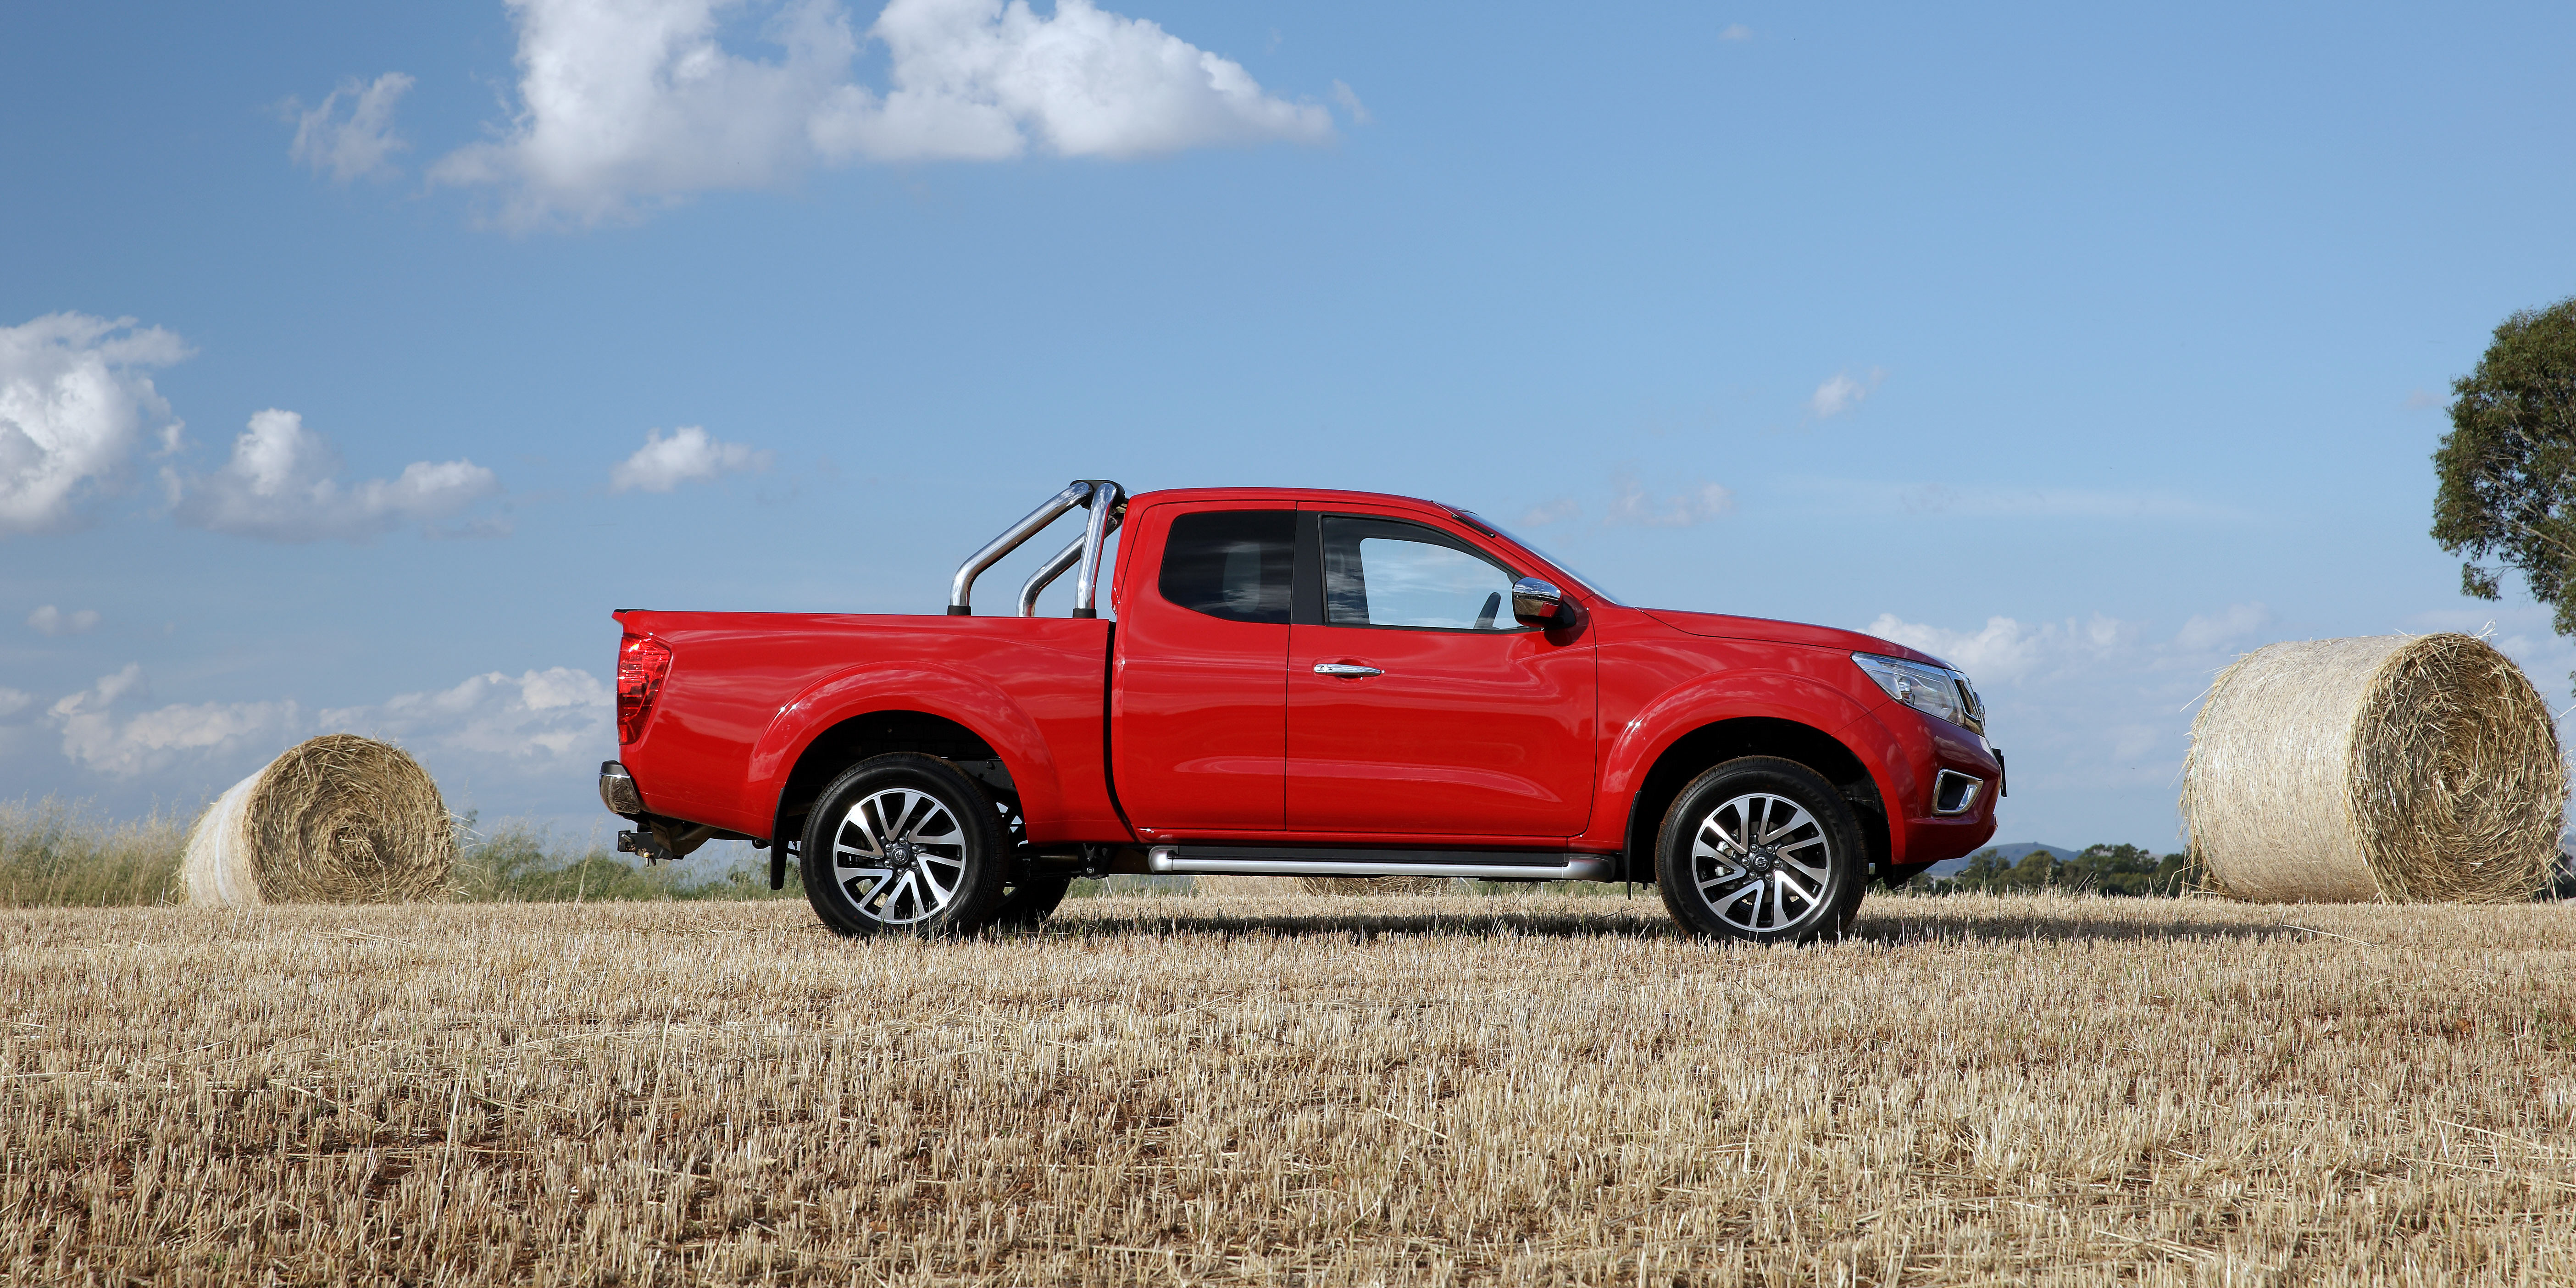 Nissan Titan Single Cab accessories specifications